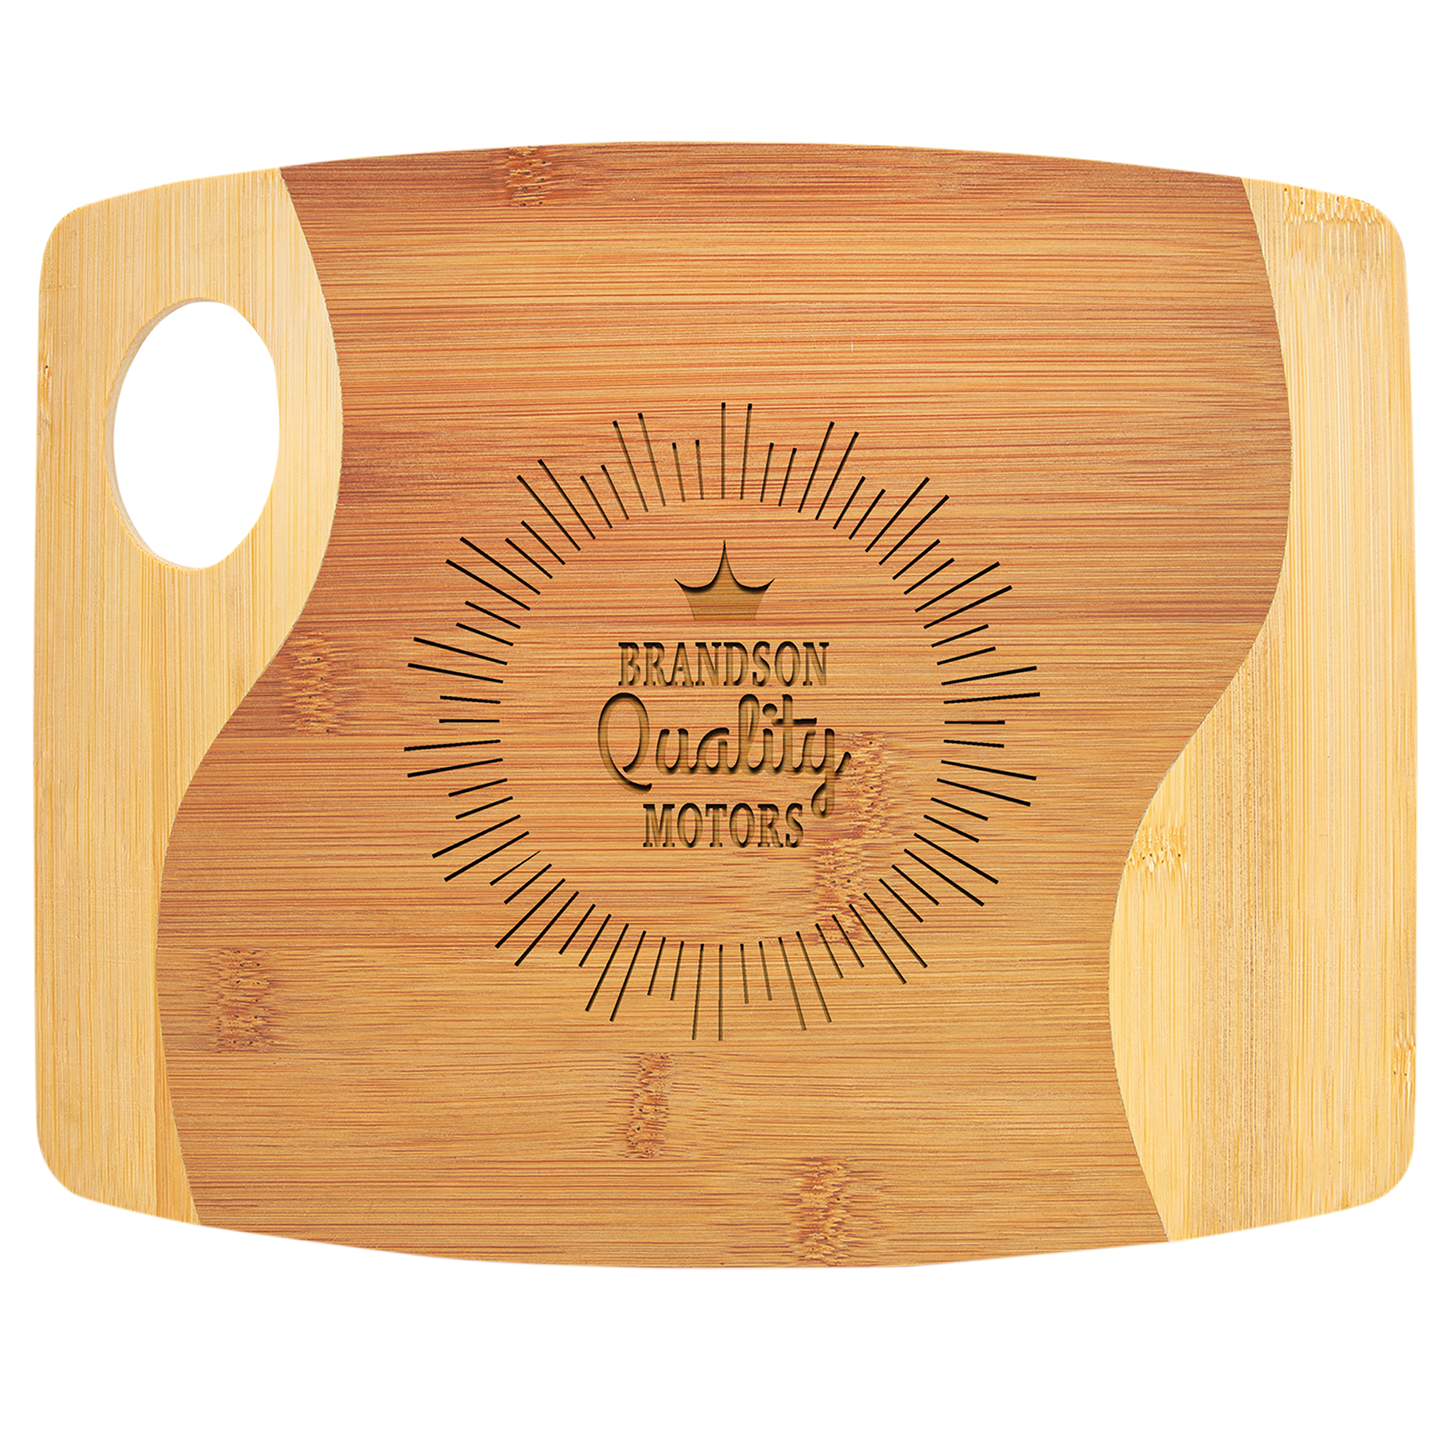 Two-Tone Bamboo Cutting Board with Handle